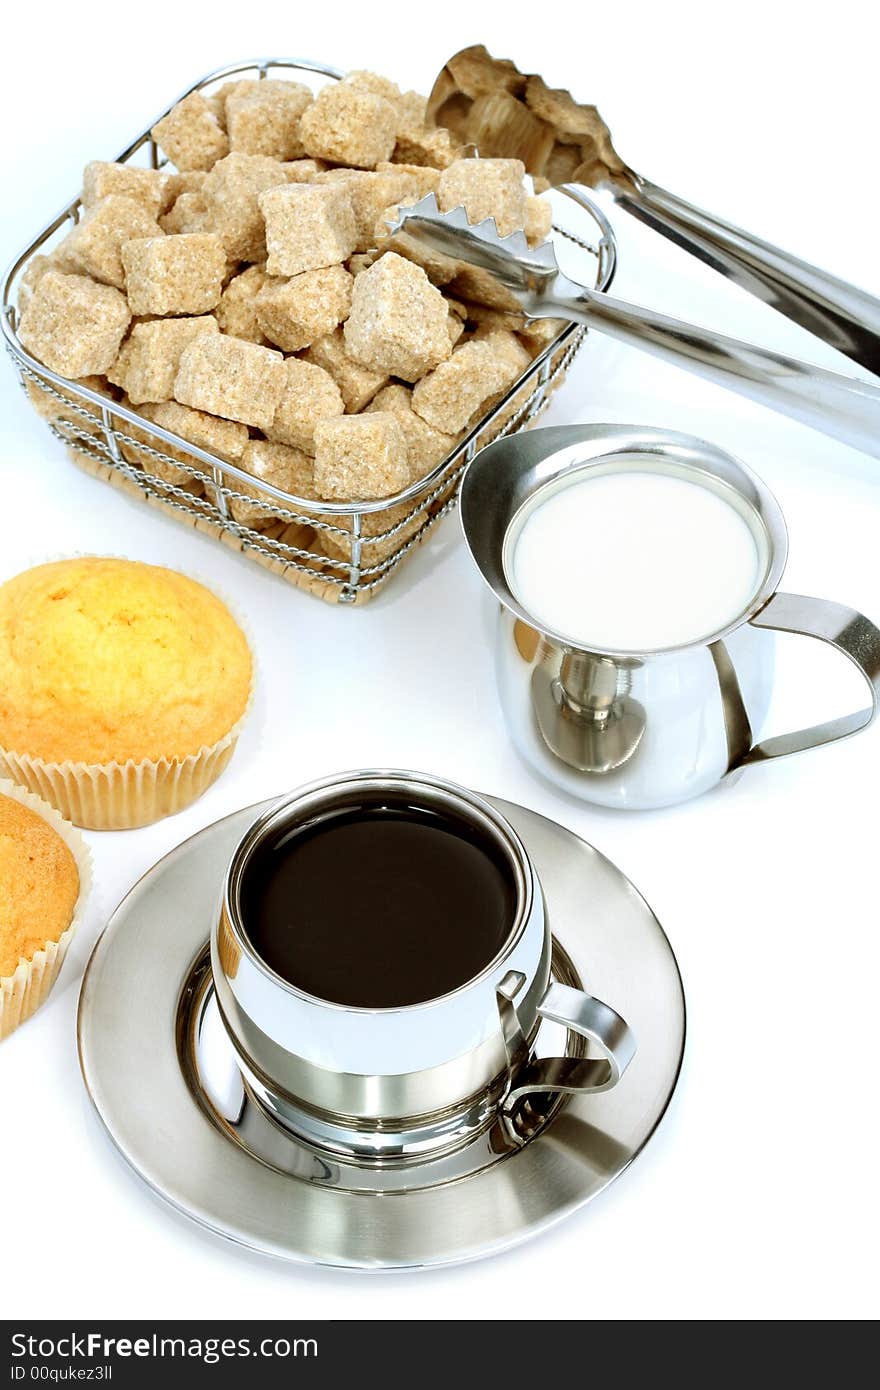 Cup of black coffee with brown sugar, muffin and milk 1. Cup of black coffee with brown sugar, muffin and milk 1